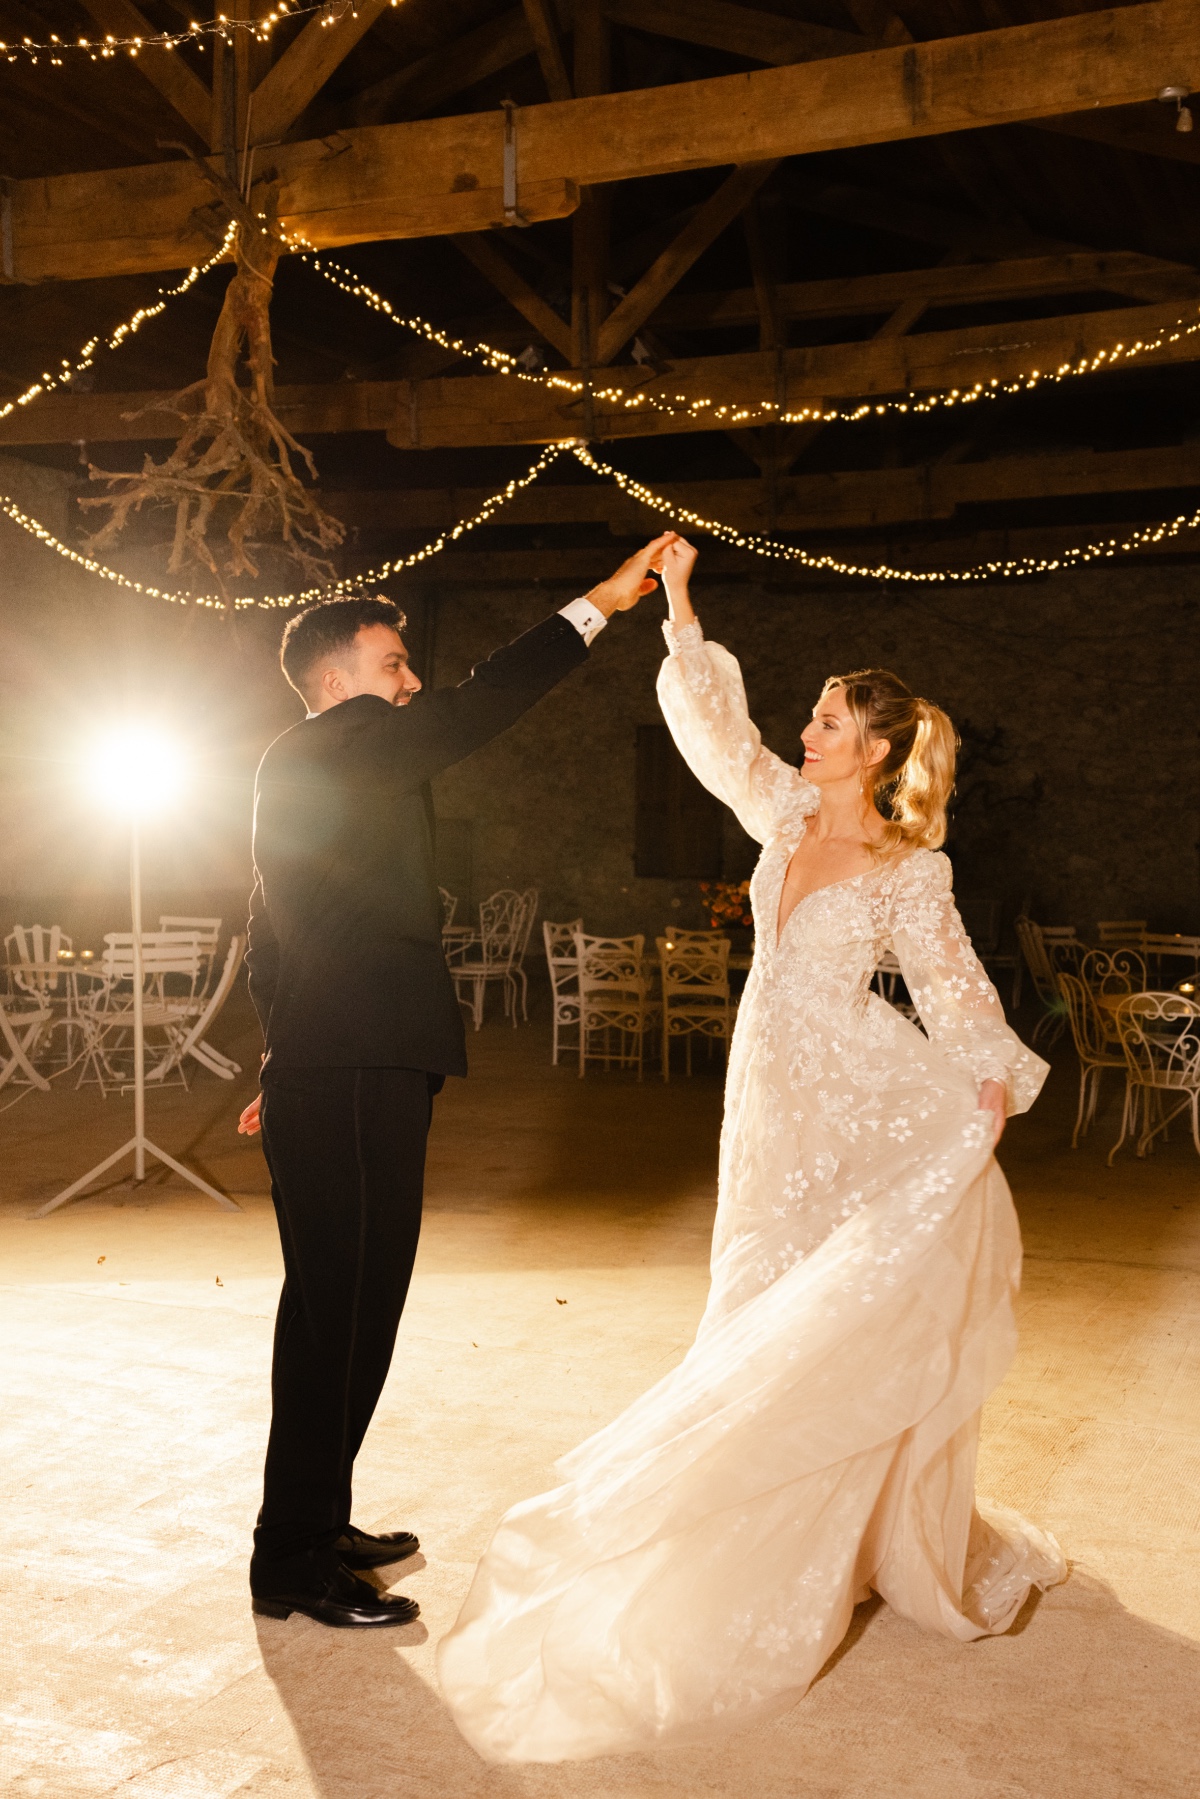 Romantic waltz for first dance at French chateau wedding